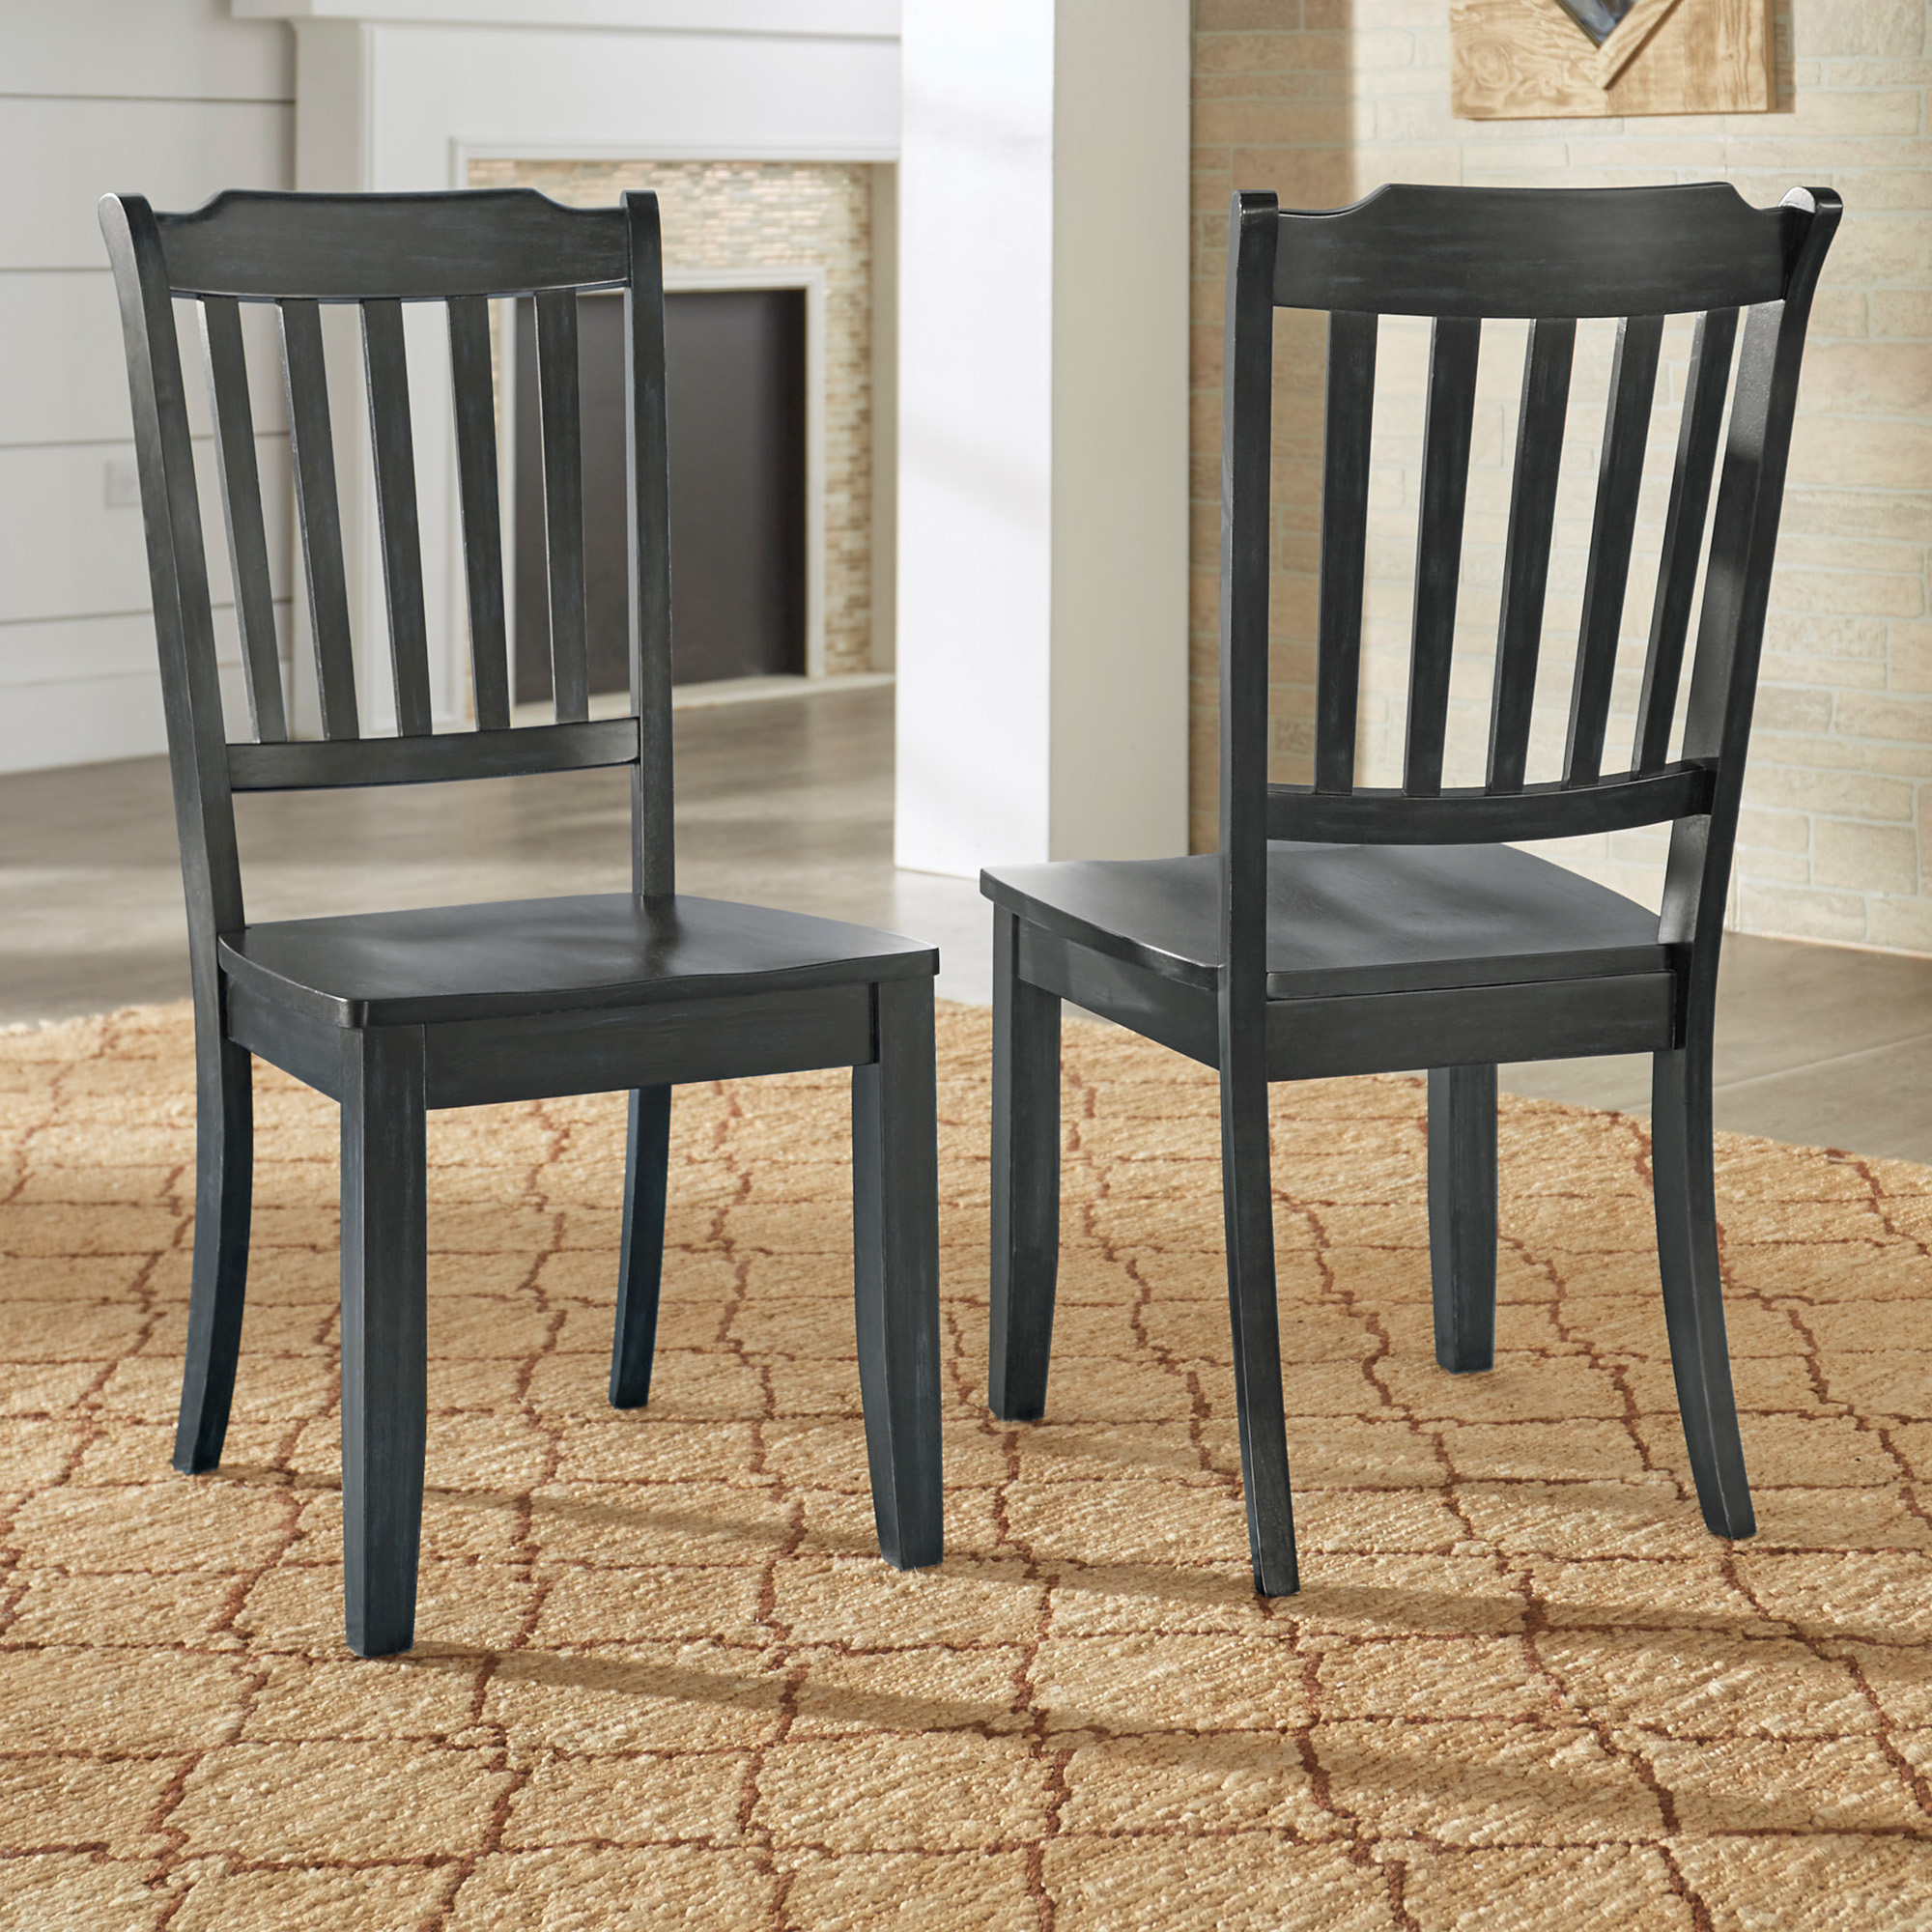 Weston Home Farmhouse Slat Back Wood Dining Chairs Set Of 2 Antique